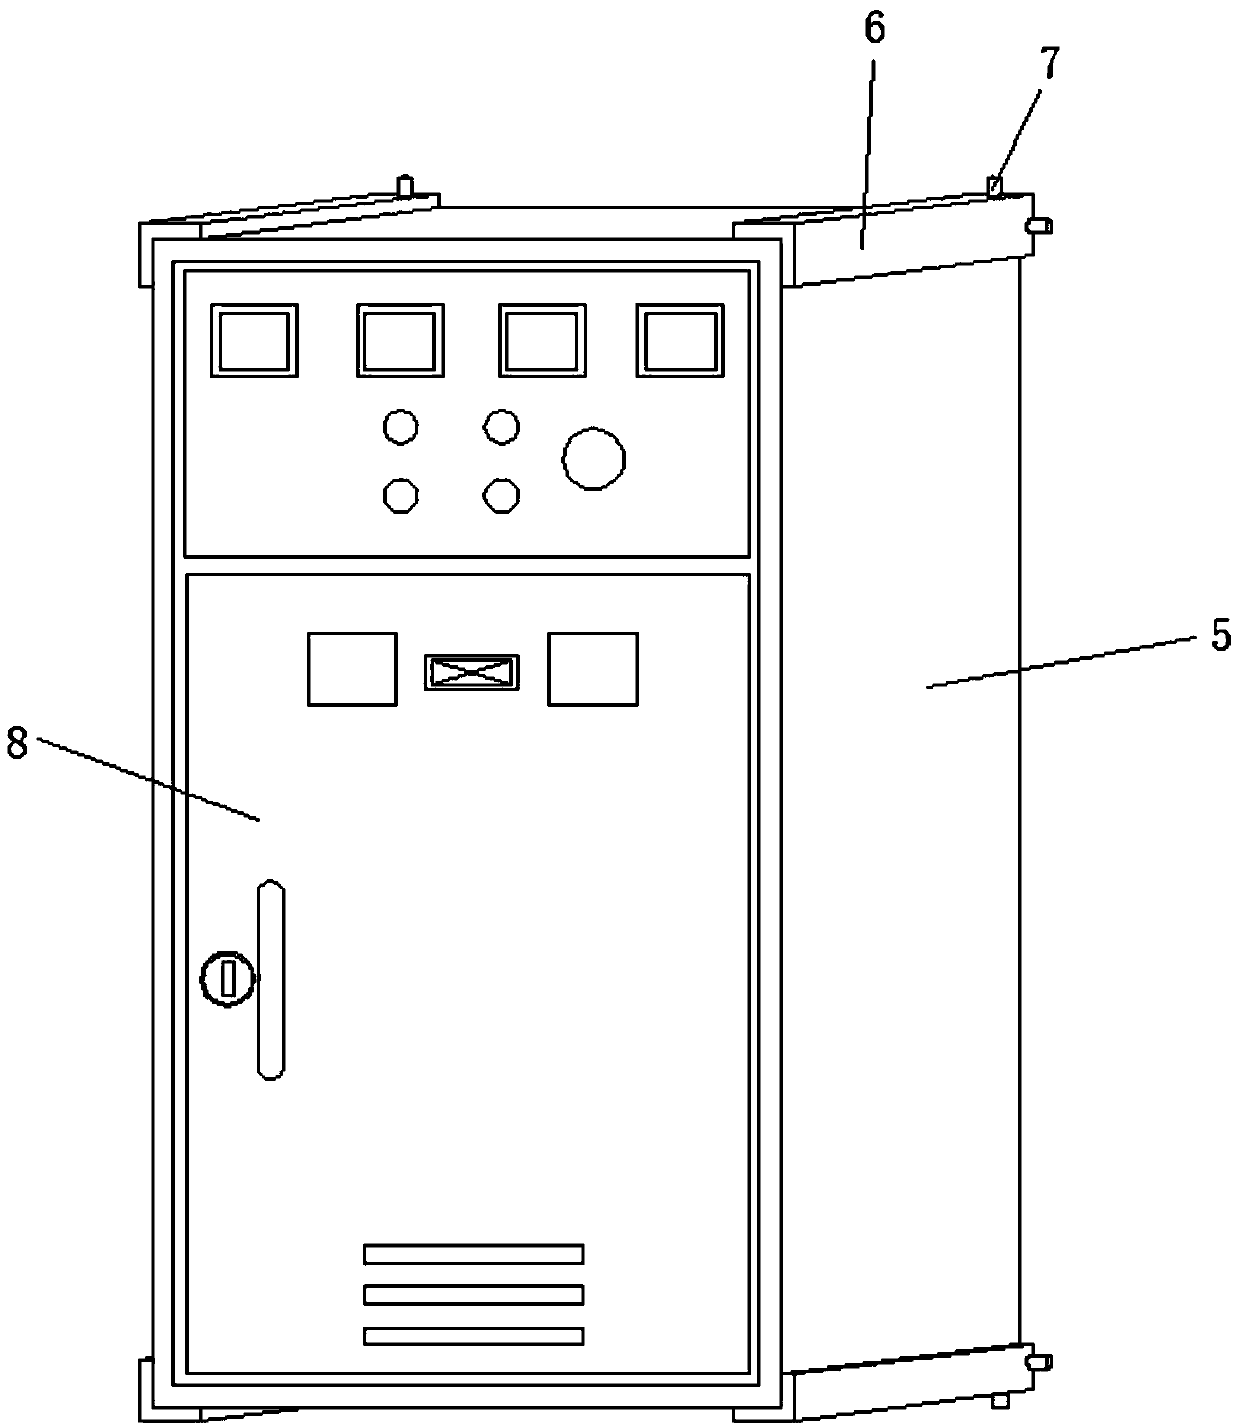 A Low-Voltage Cabinet Convenient for Maintenance and Repair